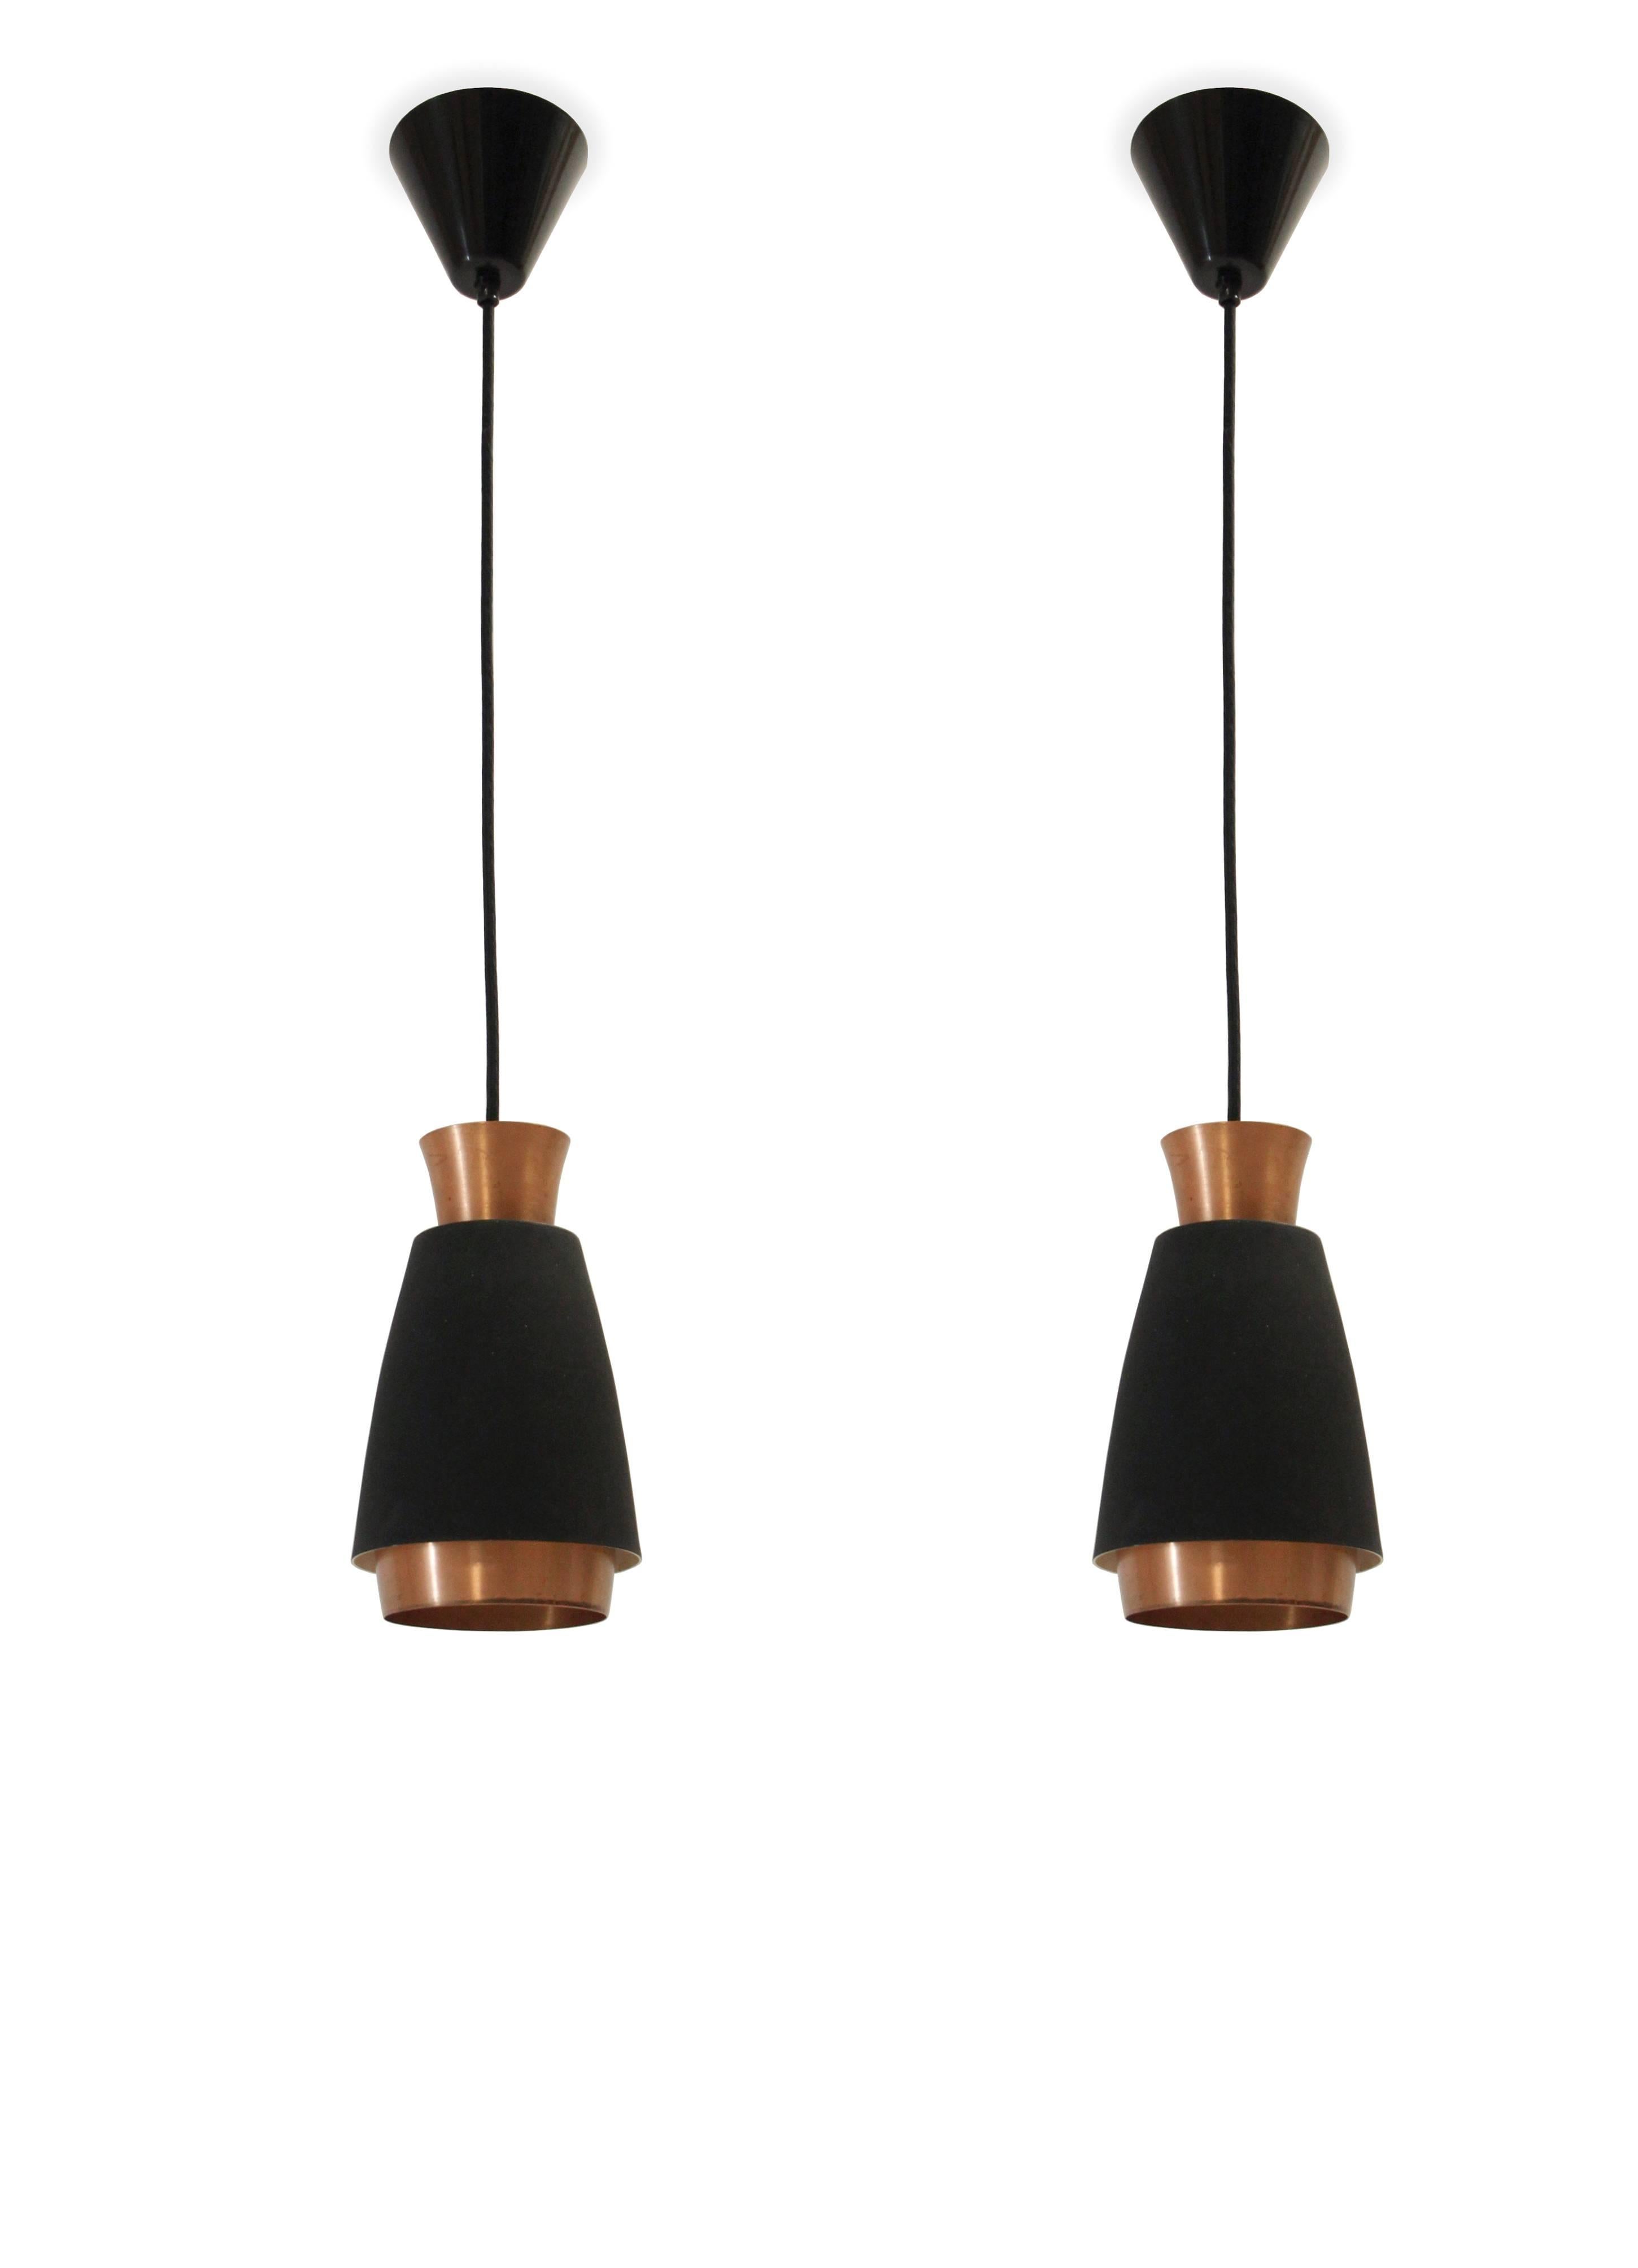 Wonderful pair of ceiling pendant in powder coated steel and copper.

Most likely designed and made in Norway from circa 1960s second half.

Both lamps are fully working and in excellent vintage condition.

Wire length 85cm.